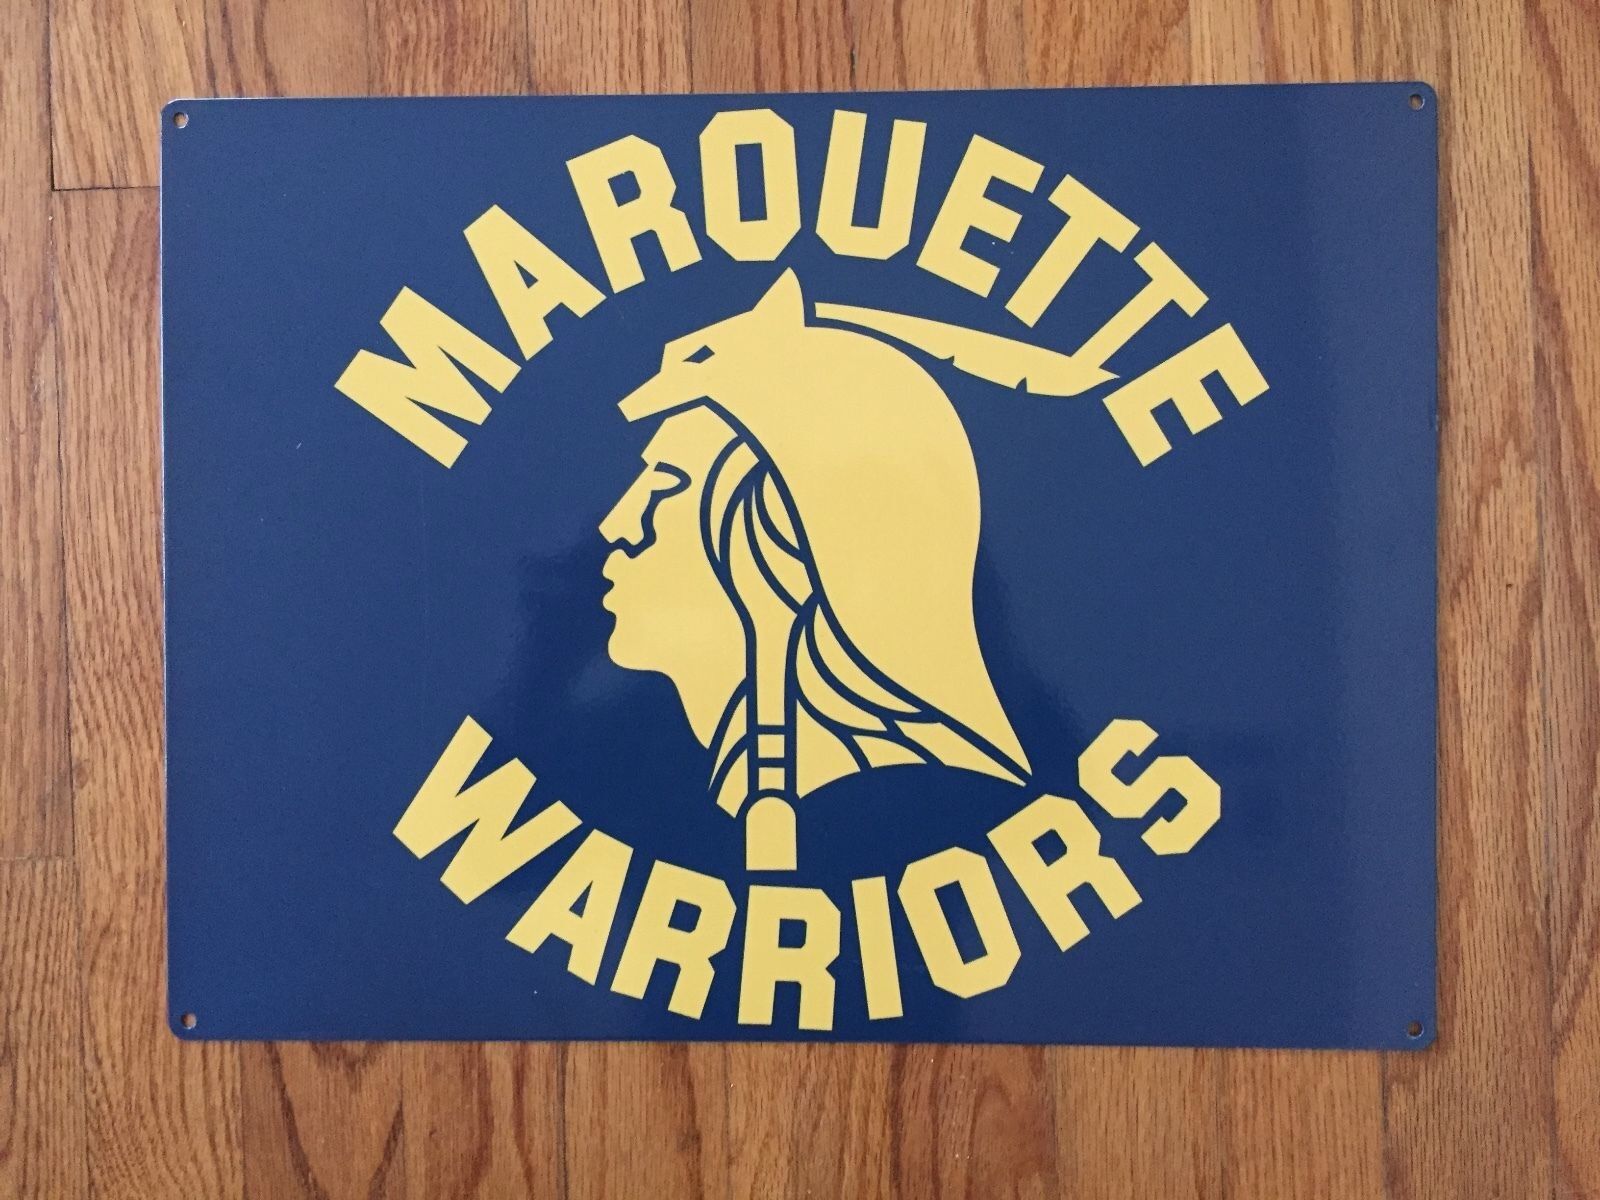 Marquette Warriors Basketball Golden Eagles Mke Wisconsin Poster Metal Sign